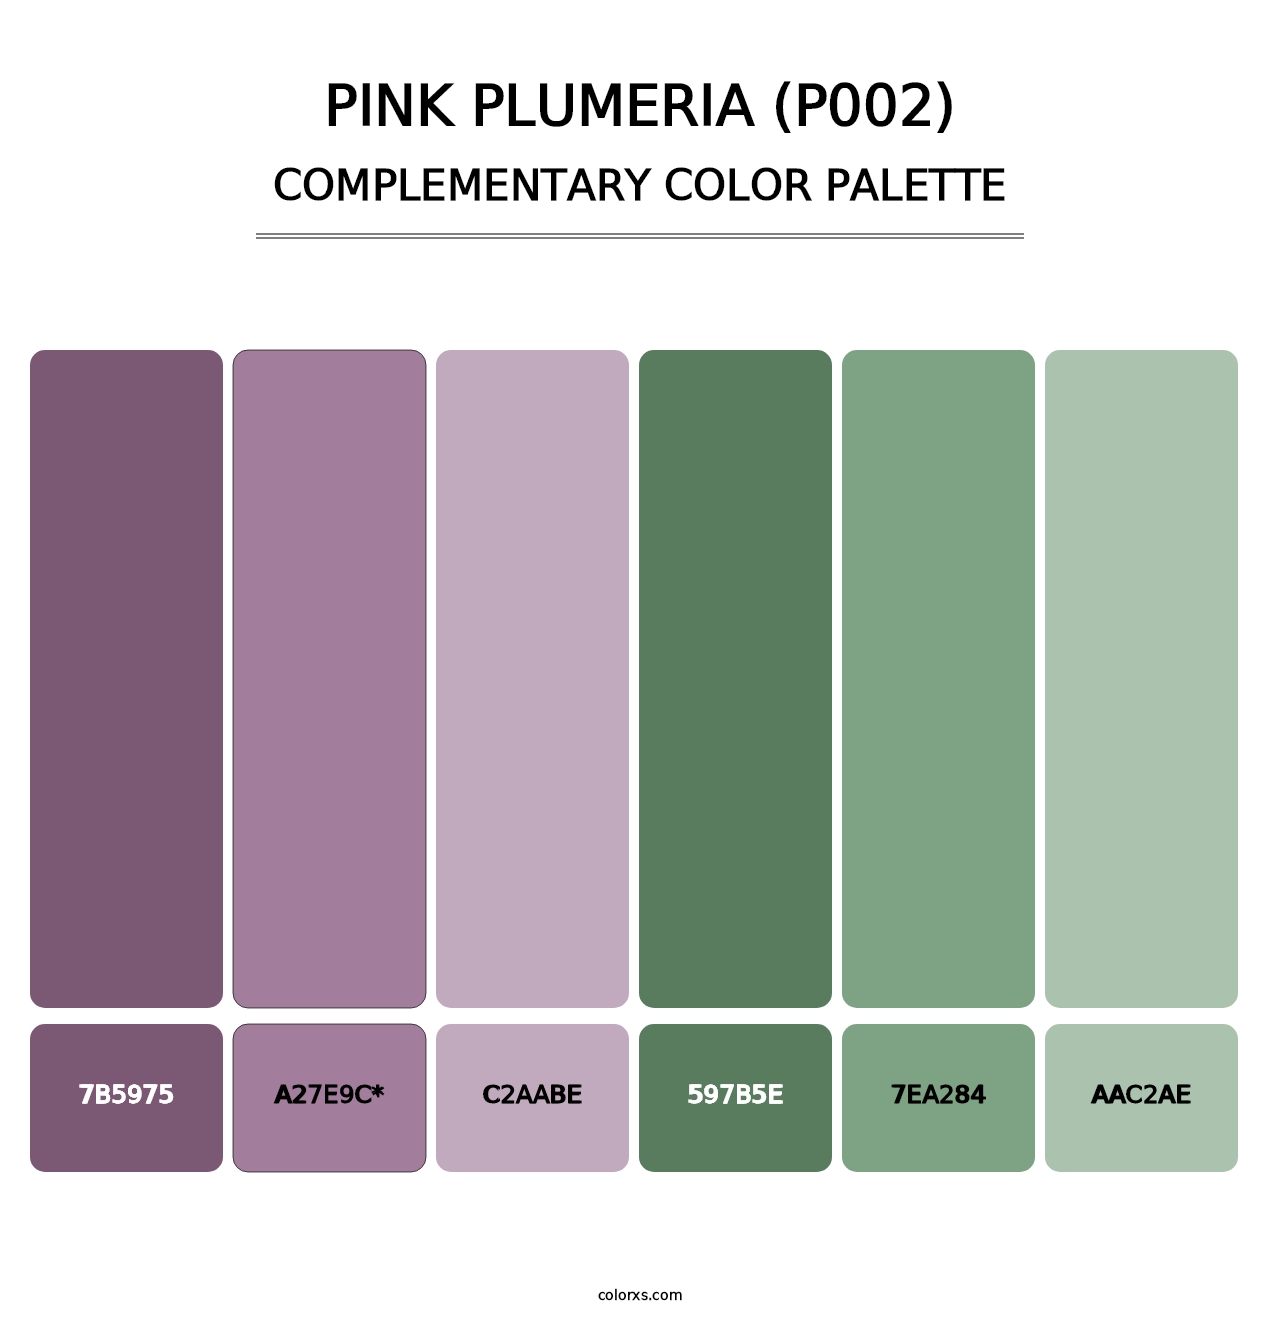 Pink Plumeria (P002) - Complementary Color Palette